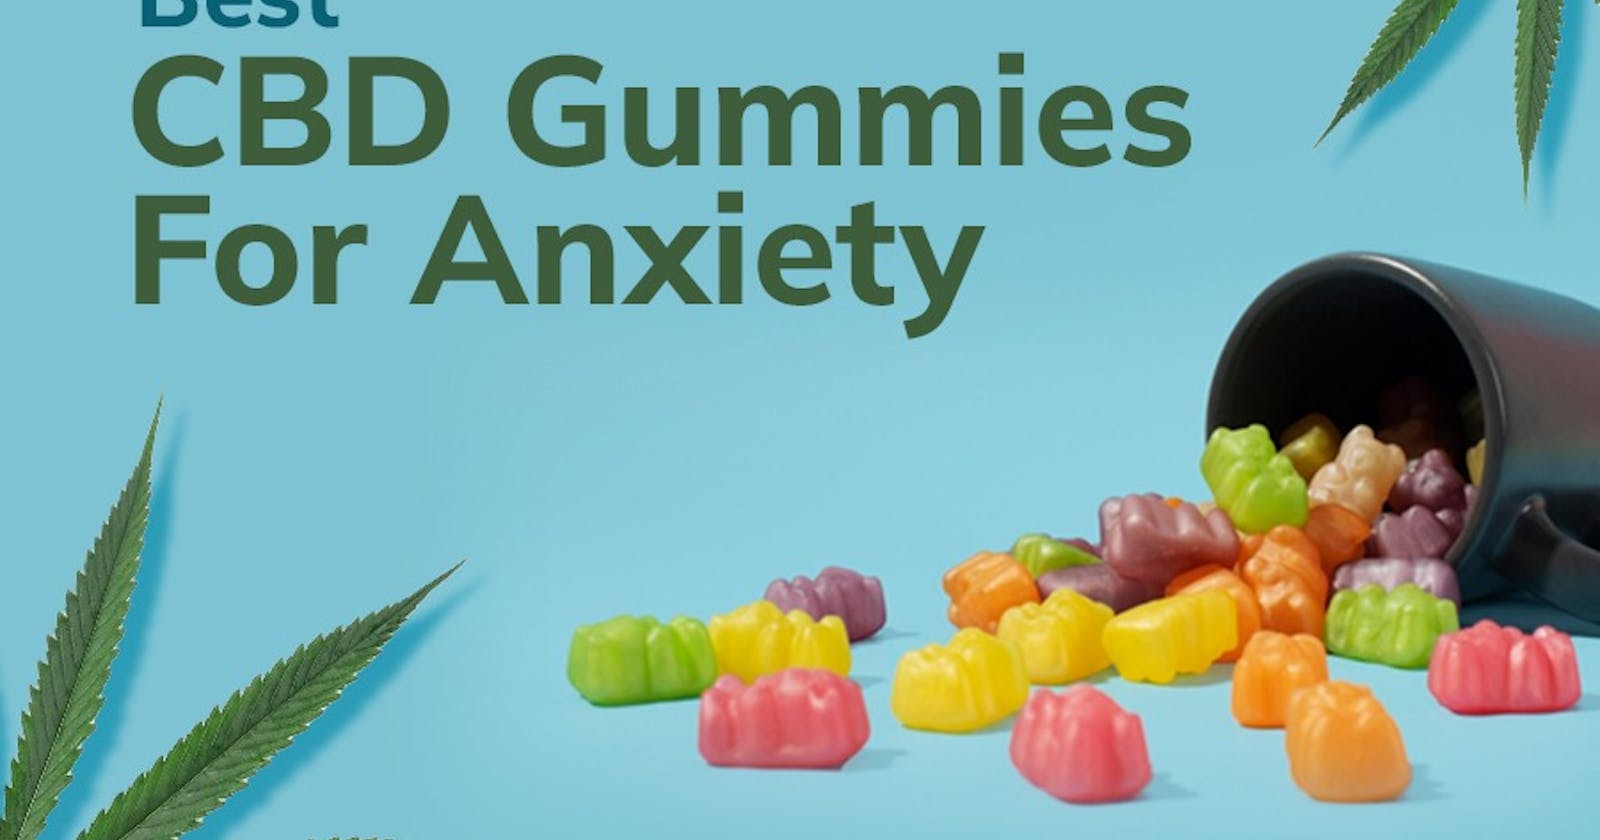 Science CBD Gummies 300mg (BE HEALTHY) Can You Rely on Subtence!